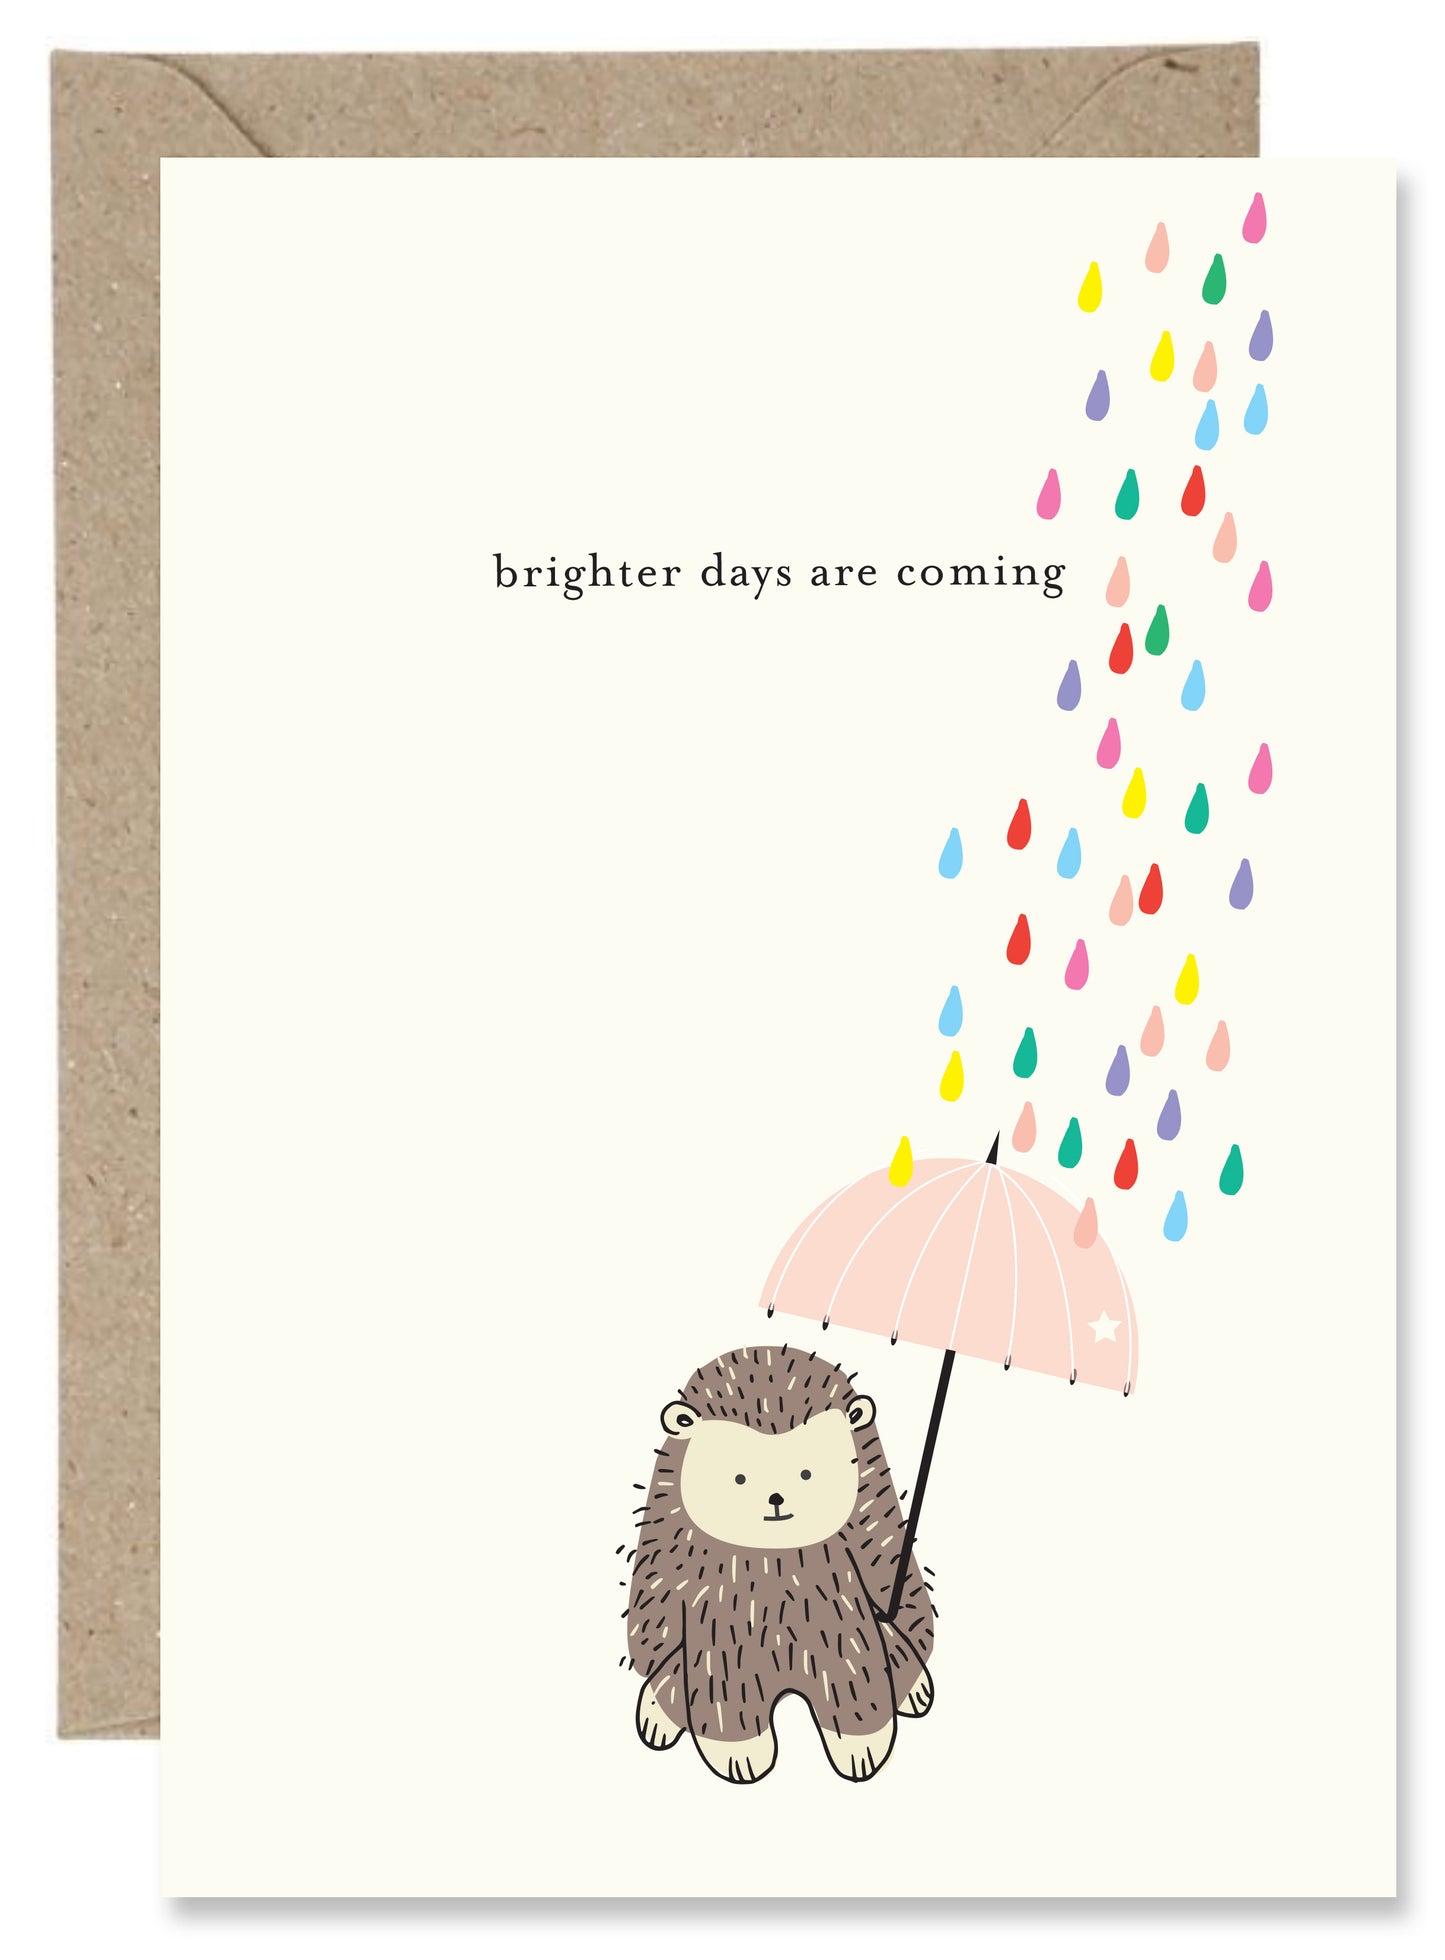 Brighter Days Are Coming